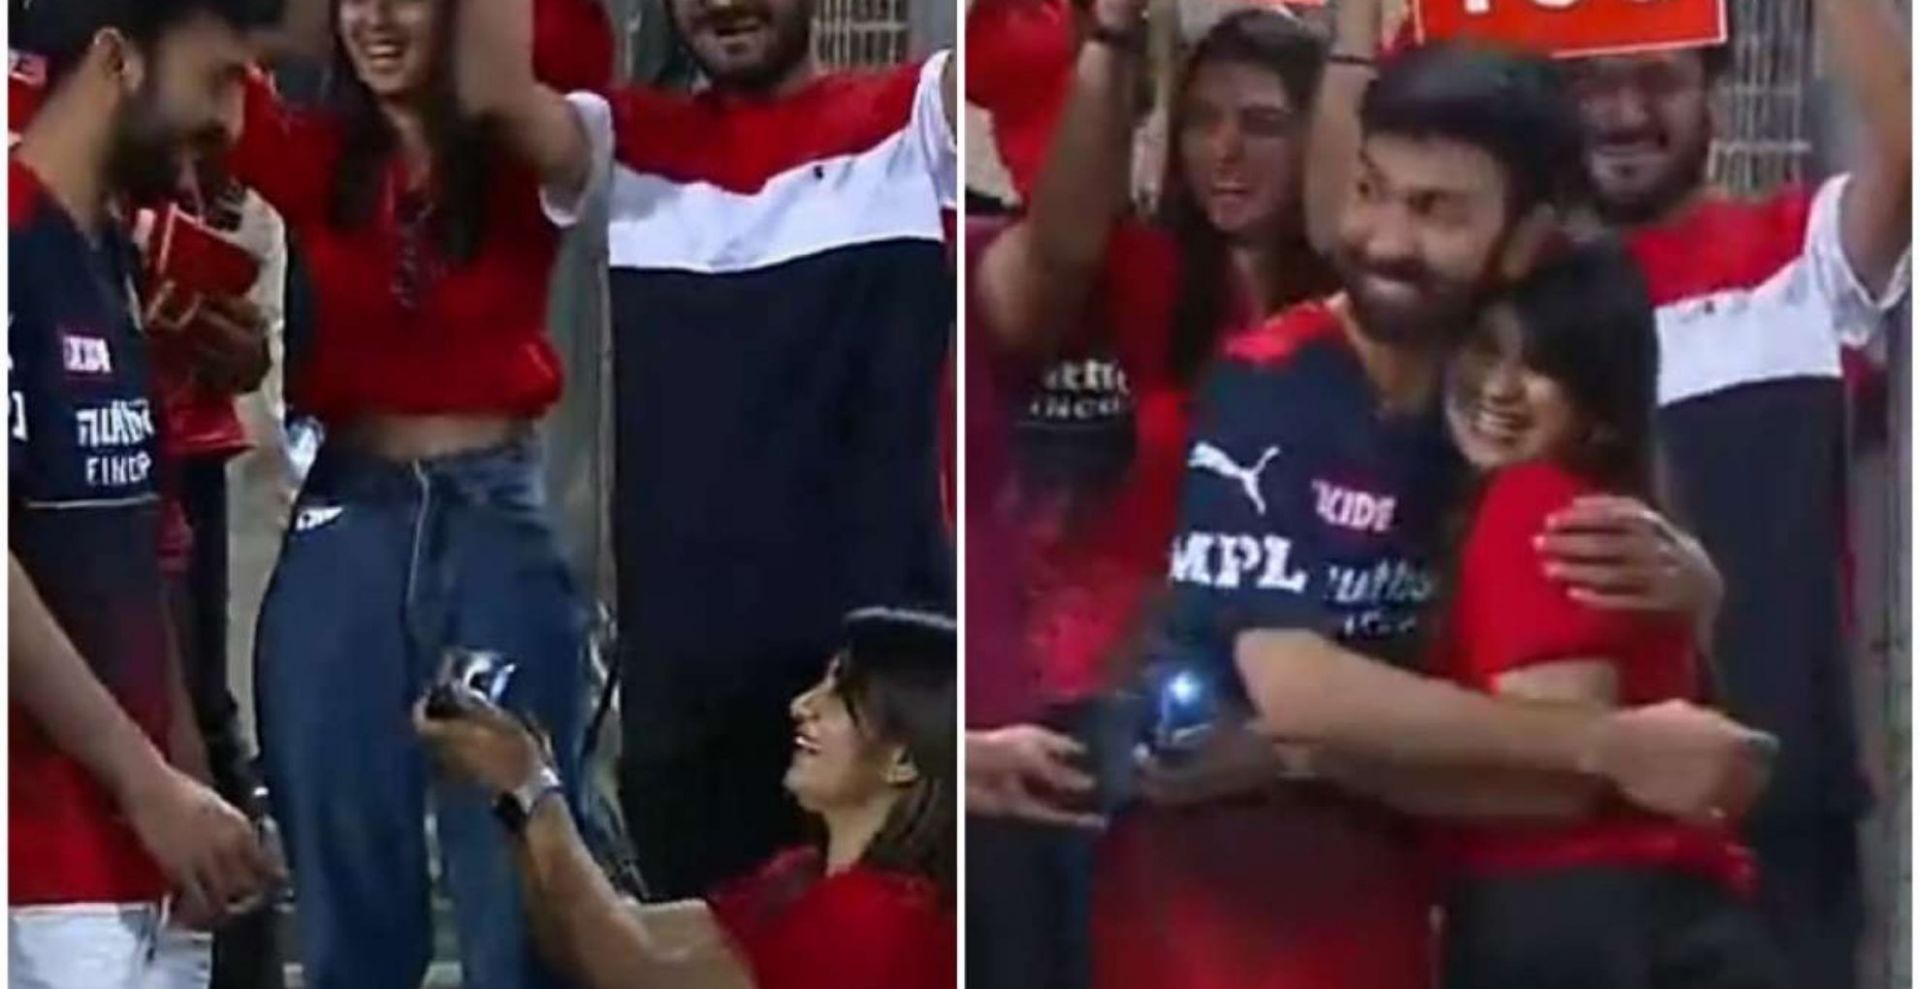 An RCB fan proposes to her boyfriend during the CSK tie (Credit: Twitter)